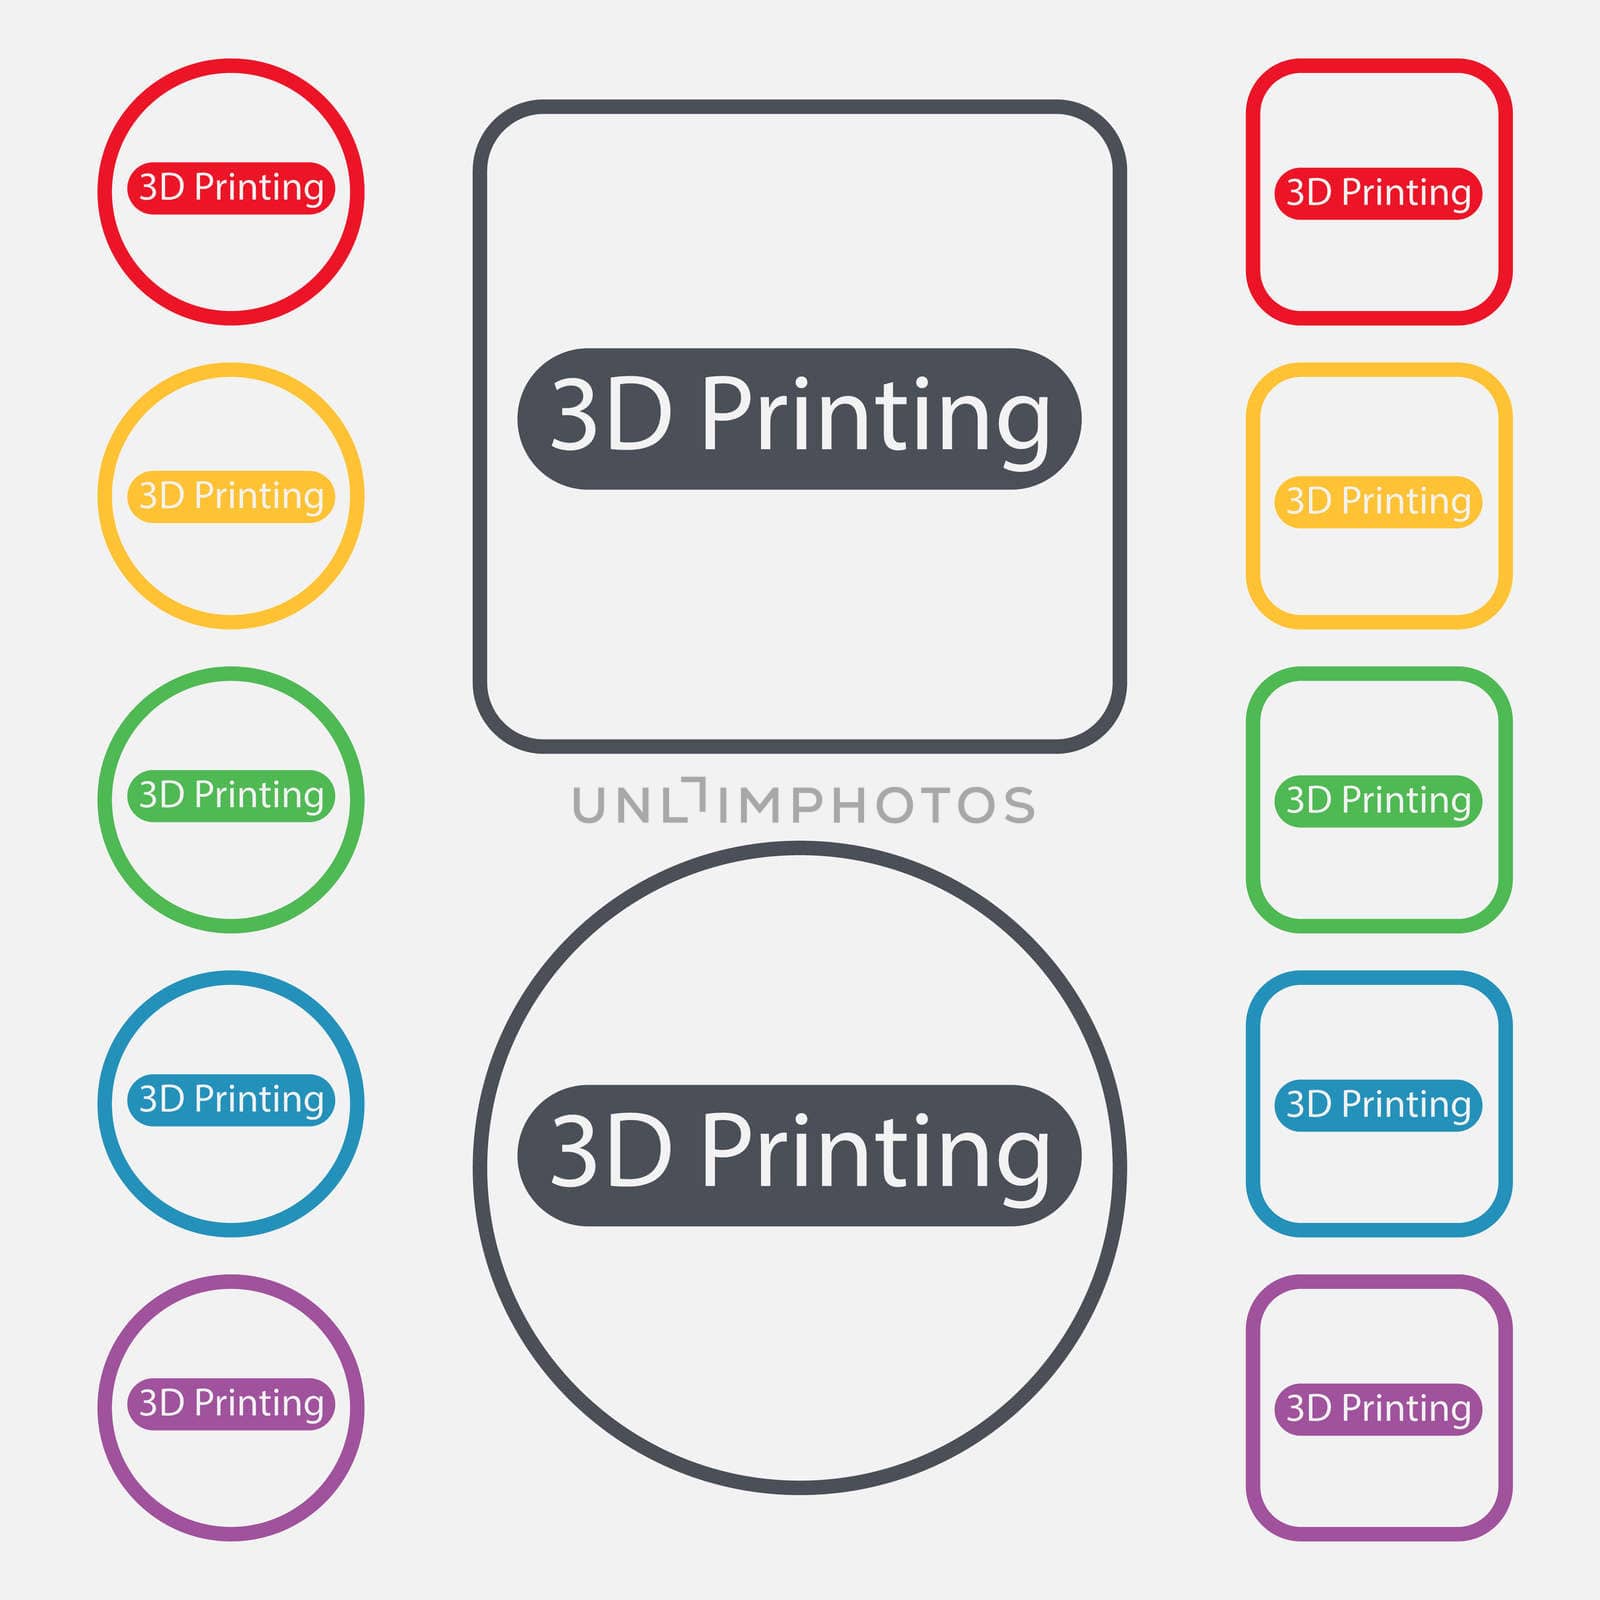 3D Print sign icon. 3d-Printing symbol. Set of colored buttons. illustration